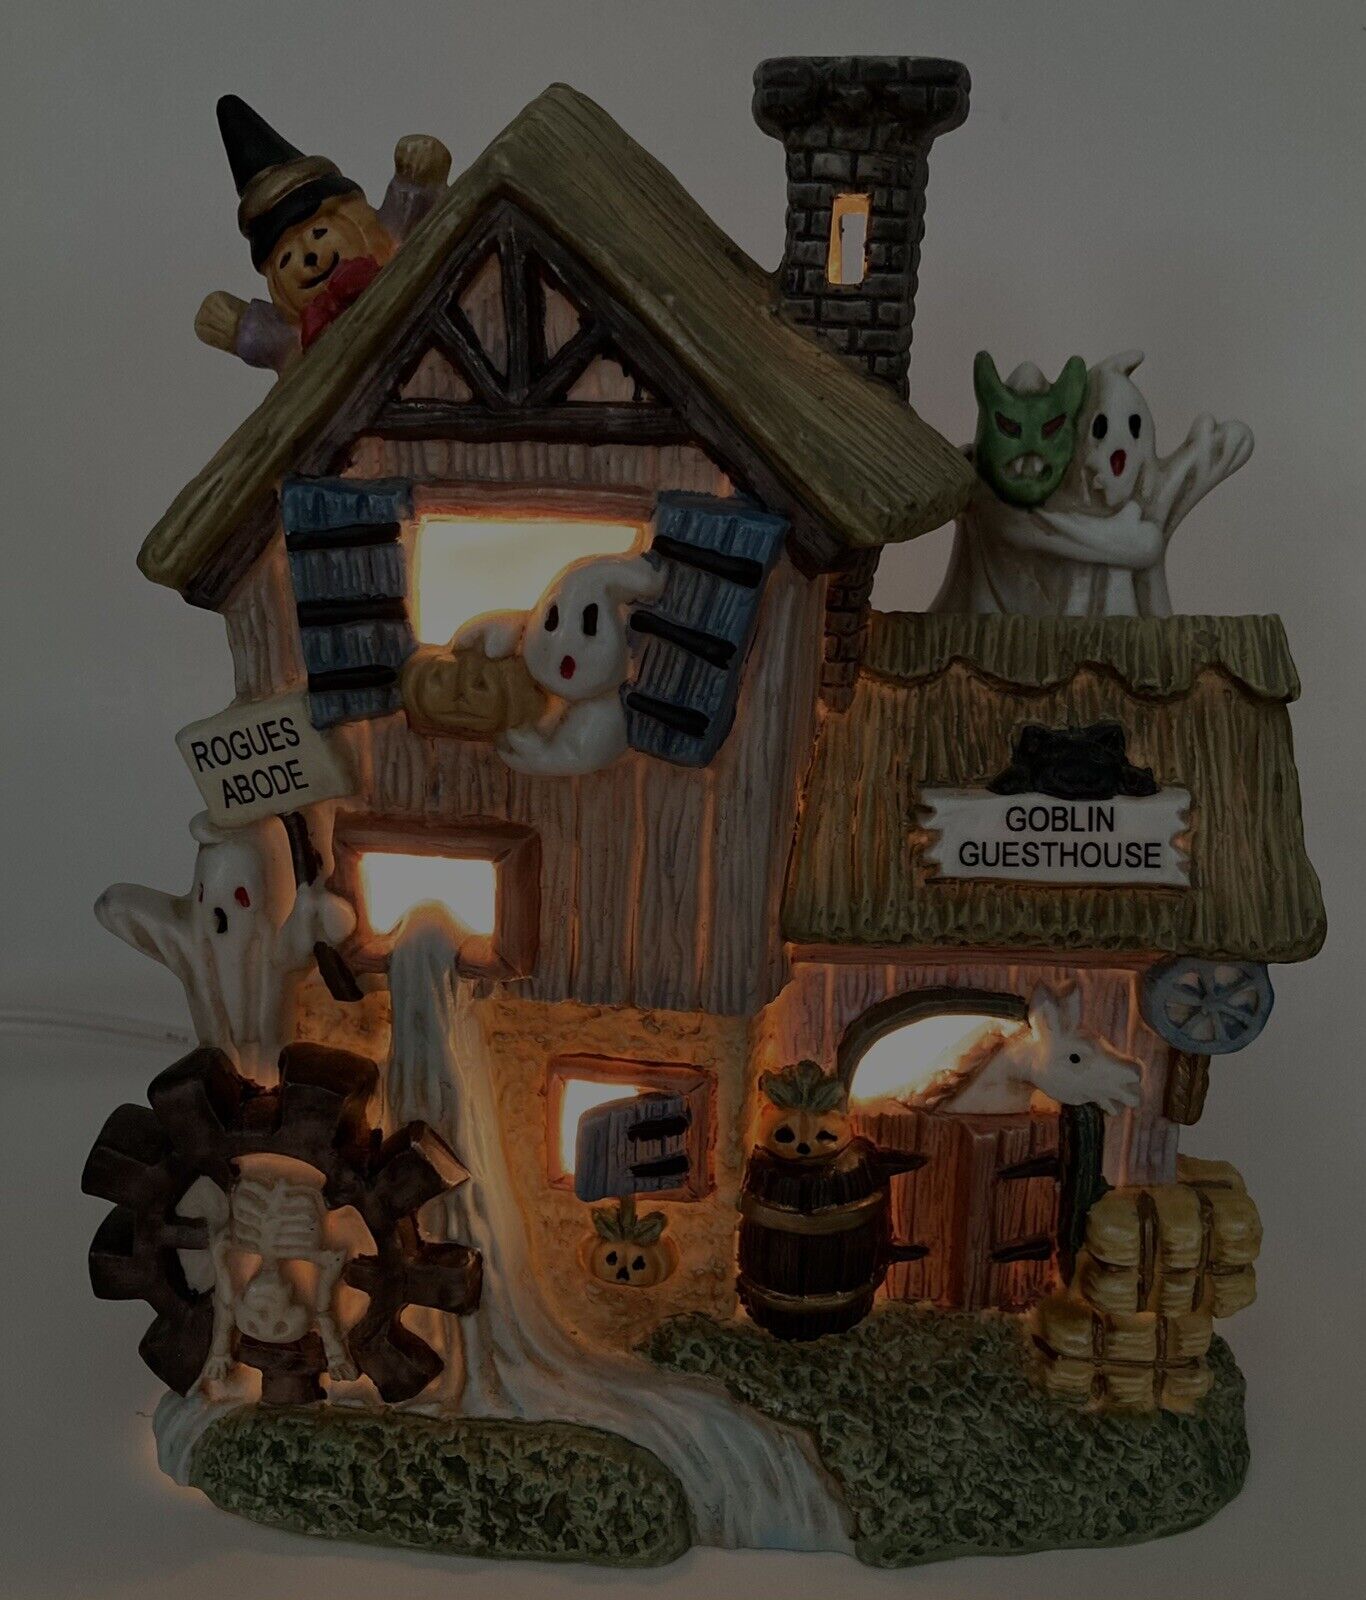 Vintage Lighted Halloween Goblin Guesthouse 54722 ABC Dist In Box 3 Piece Set